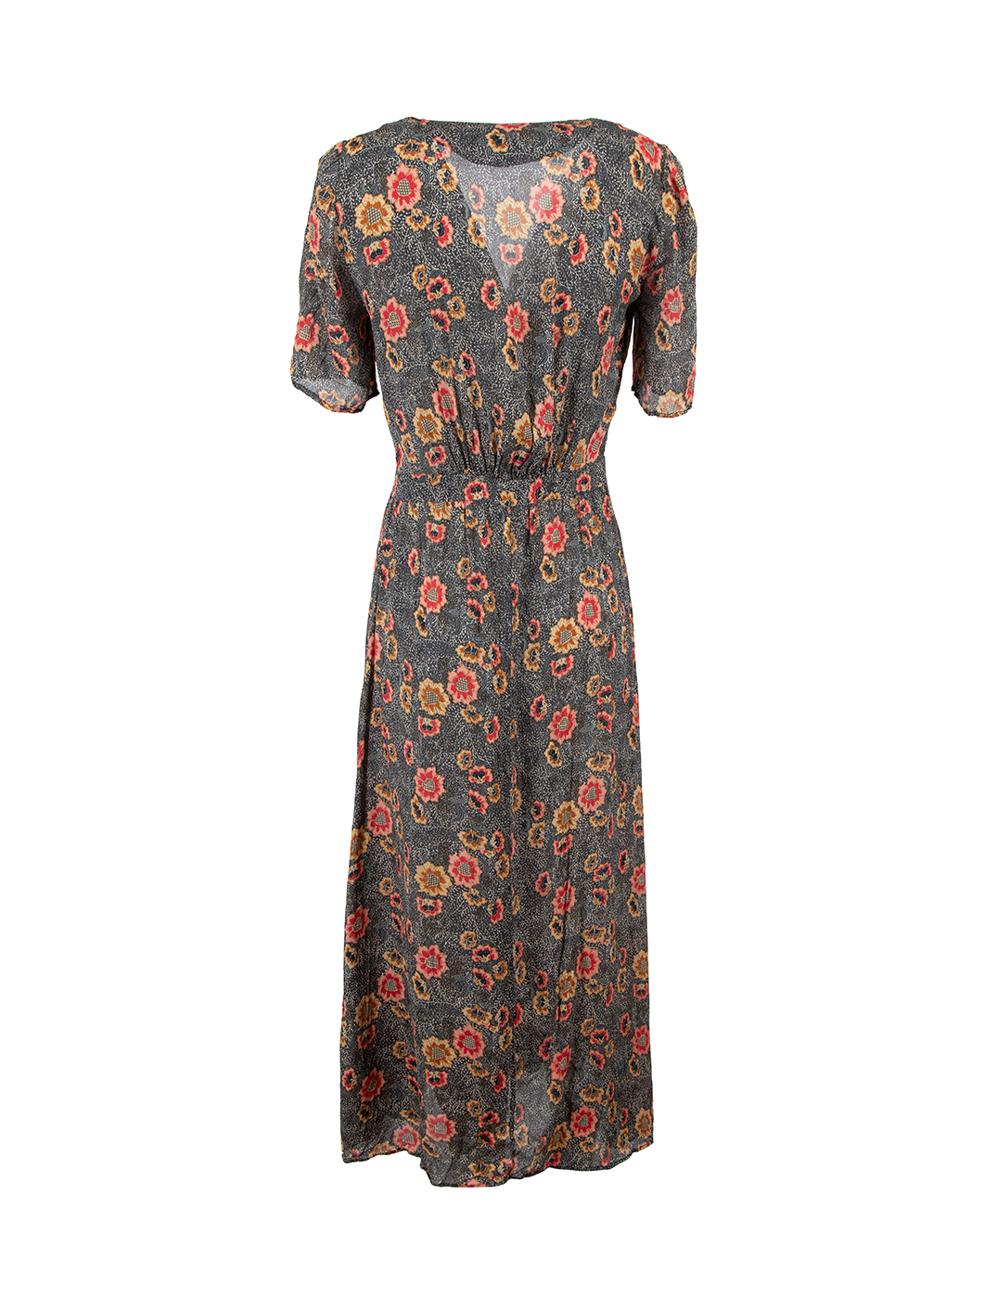 Isabel Marant Étoile Floral Print Midi Wrap Dress Size M In Good Condition In London, GB